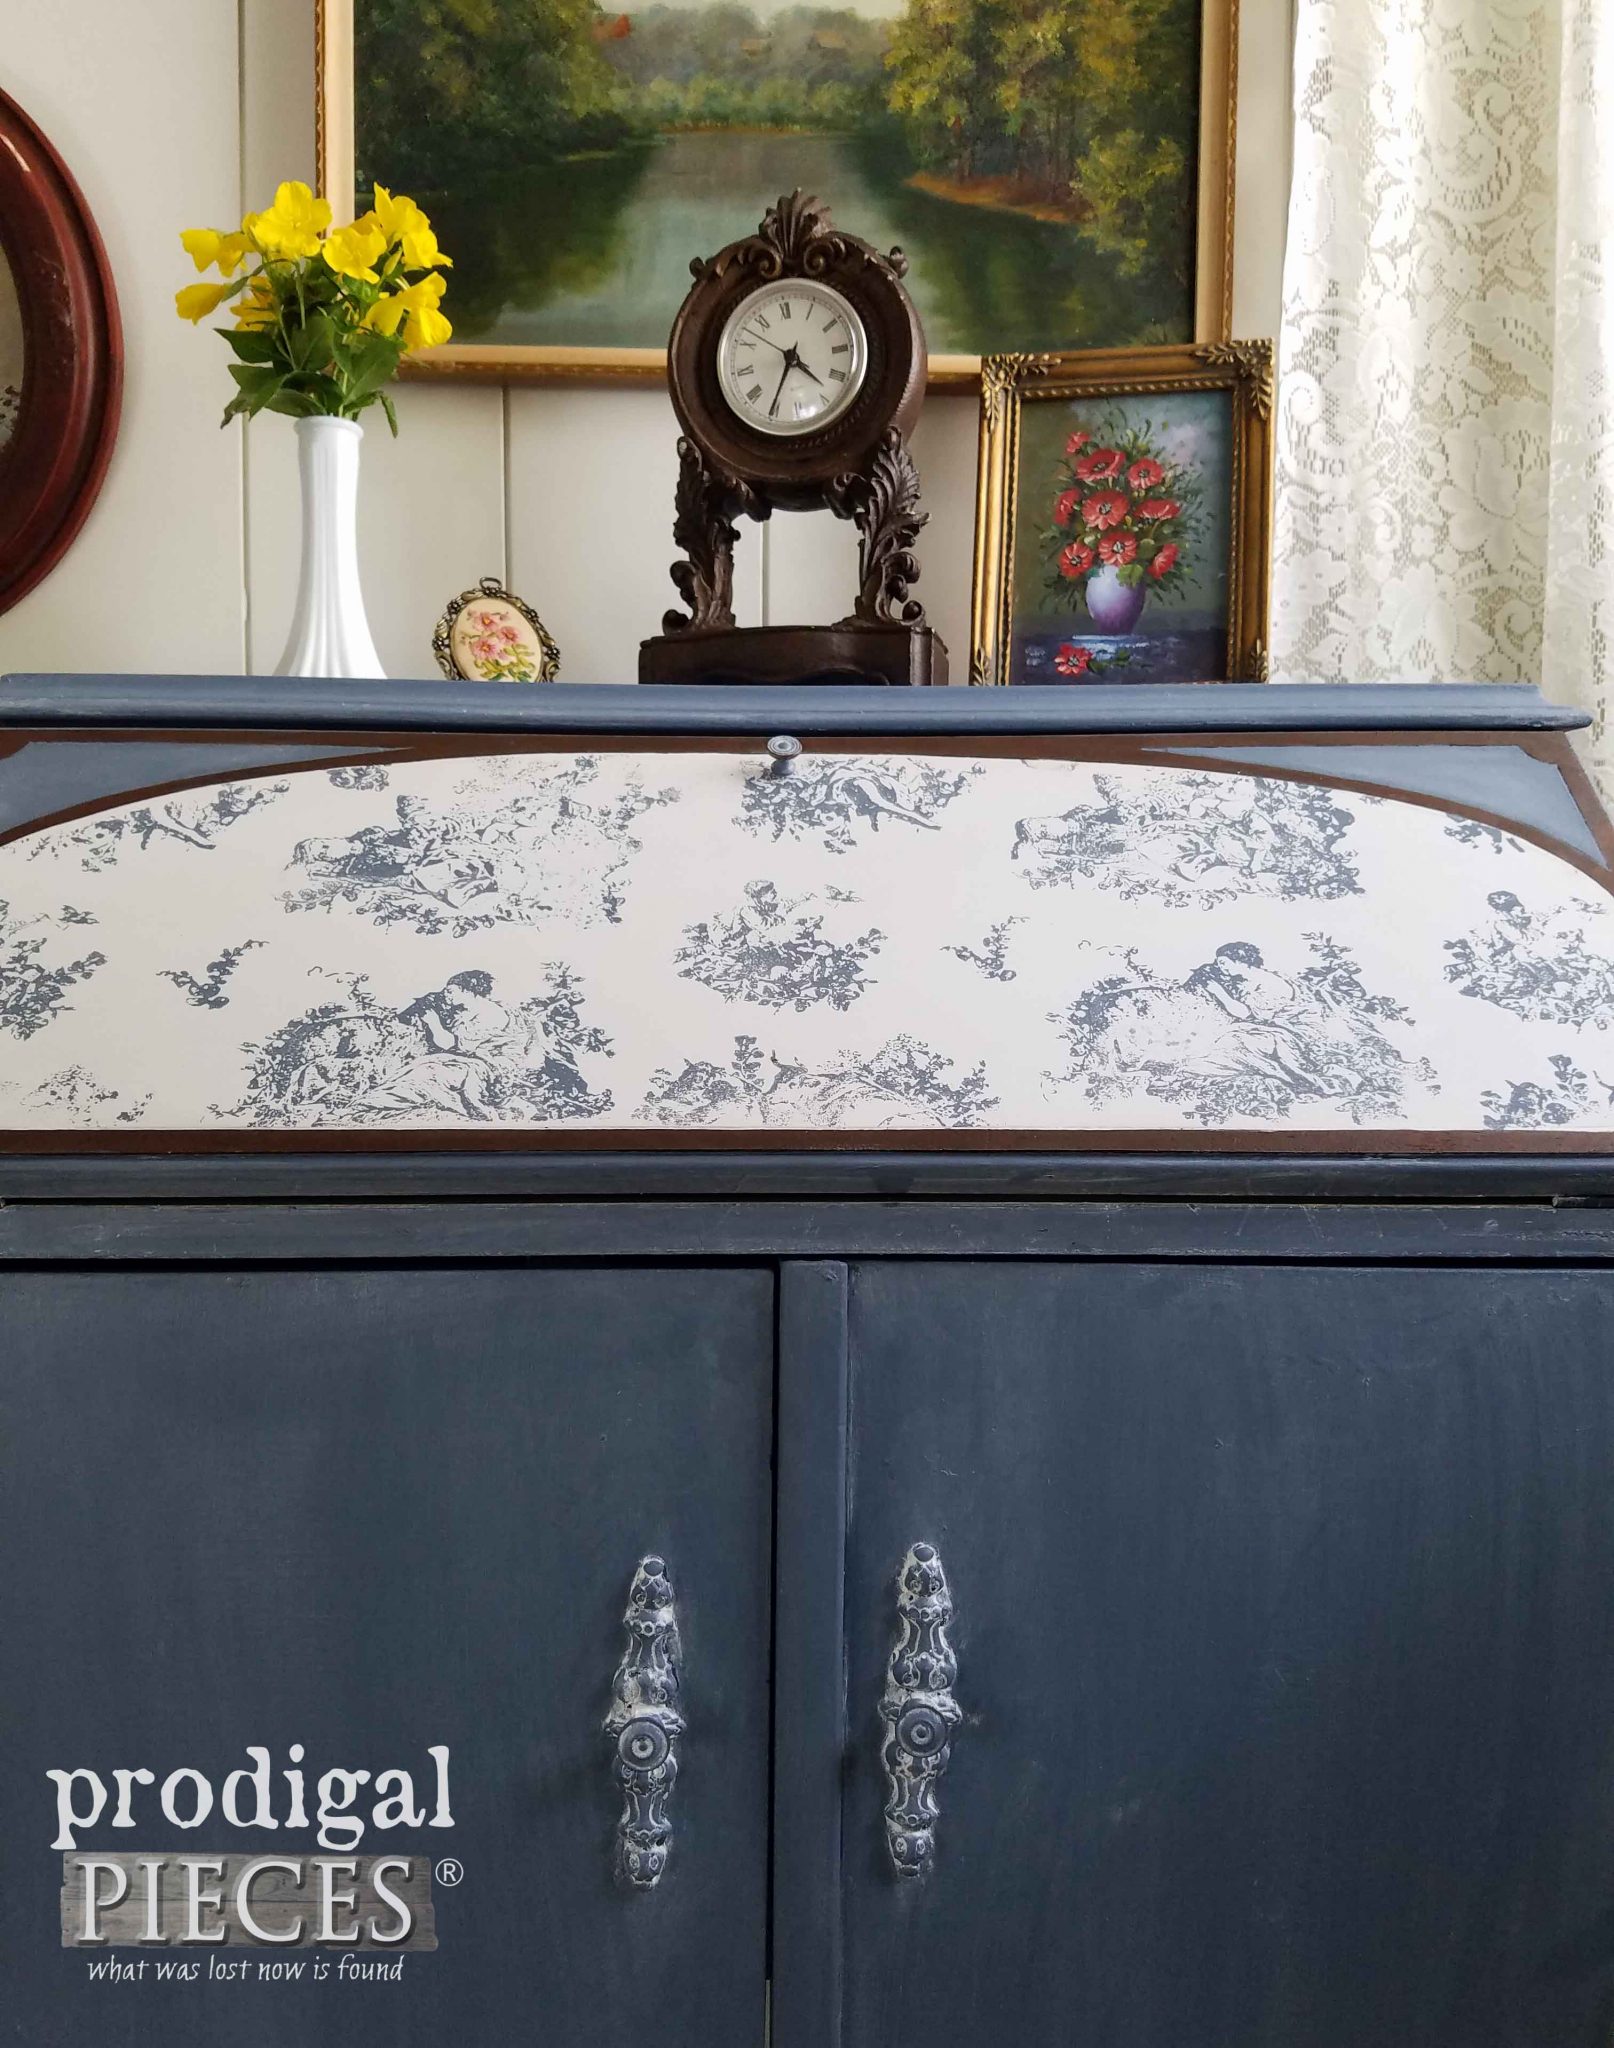 Vintage Desk with Cottage Style Flair by Prodigal Pieces | prodigalpieces.com